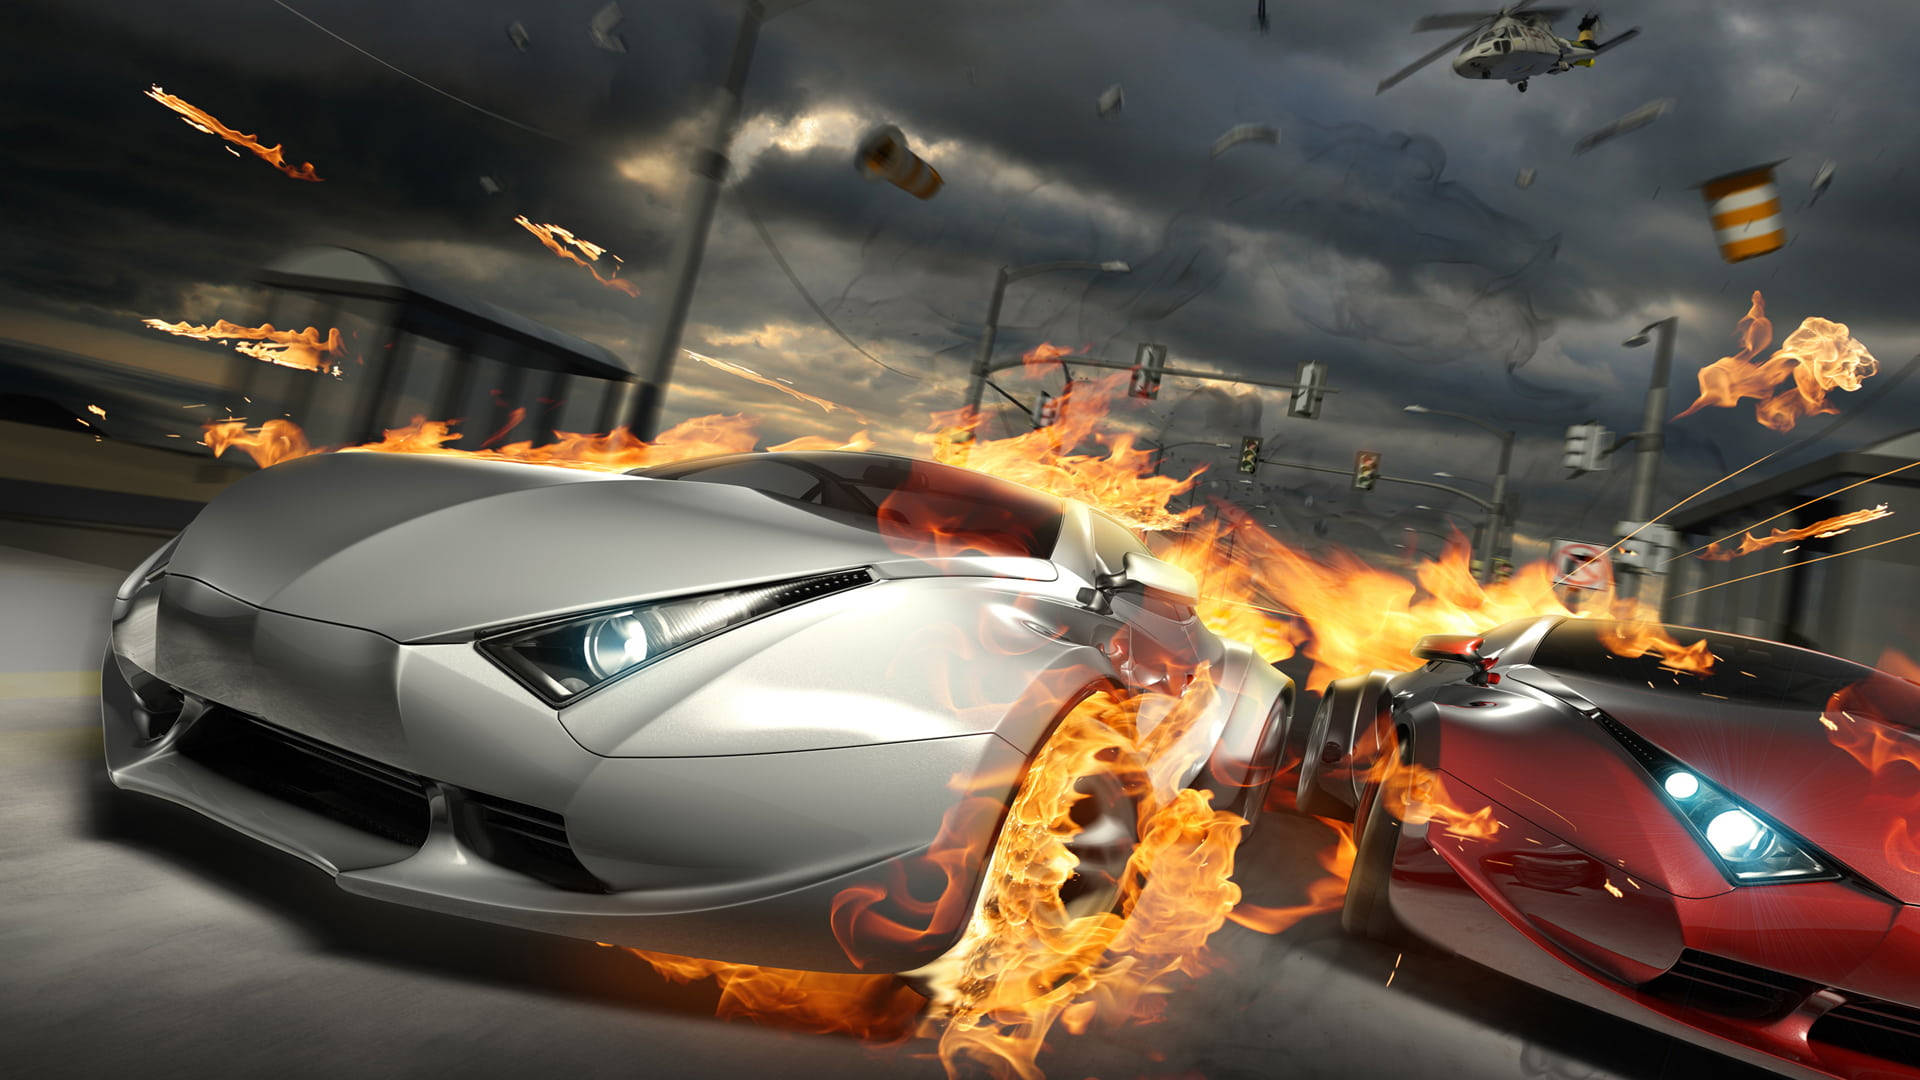 Free Fire Car Wallpaper Downloads, [100+] Fire Car Wallpapers for FREE |  Wallpapers.com